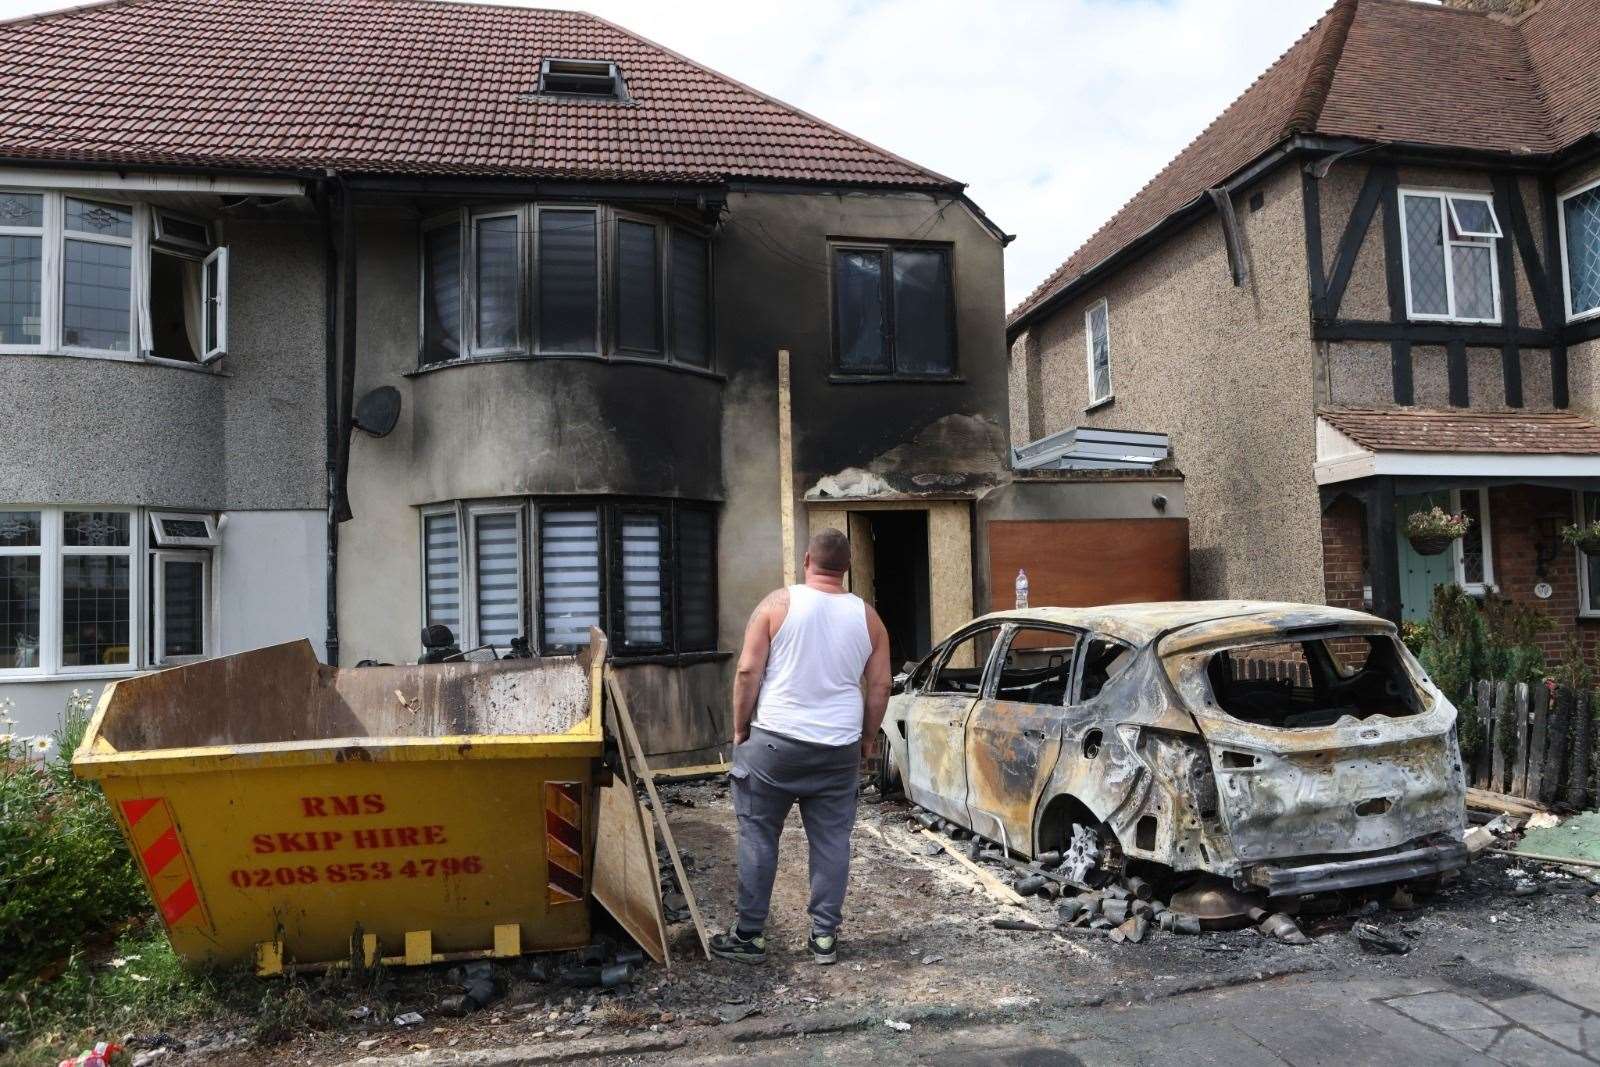 TikTok-star family The Smithy's have been targeted by arsonists Picture: UKNIP